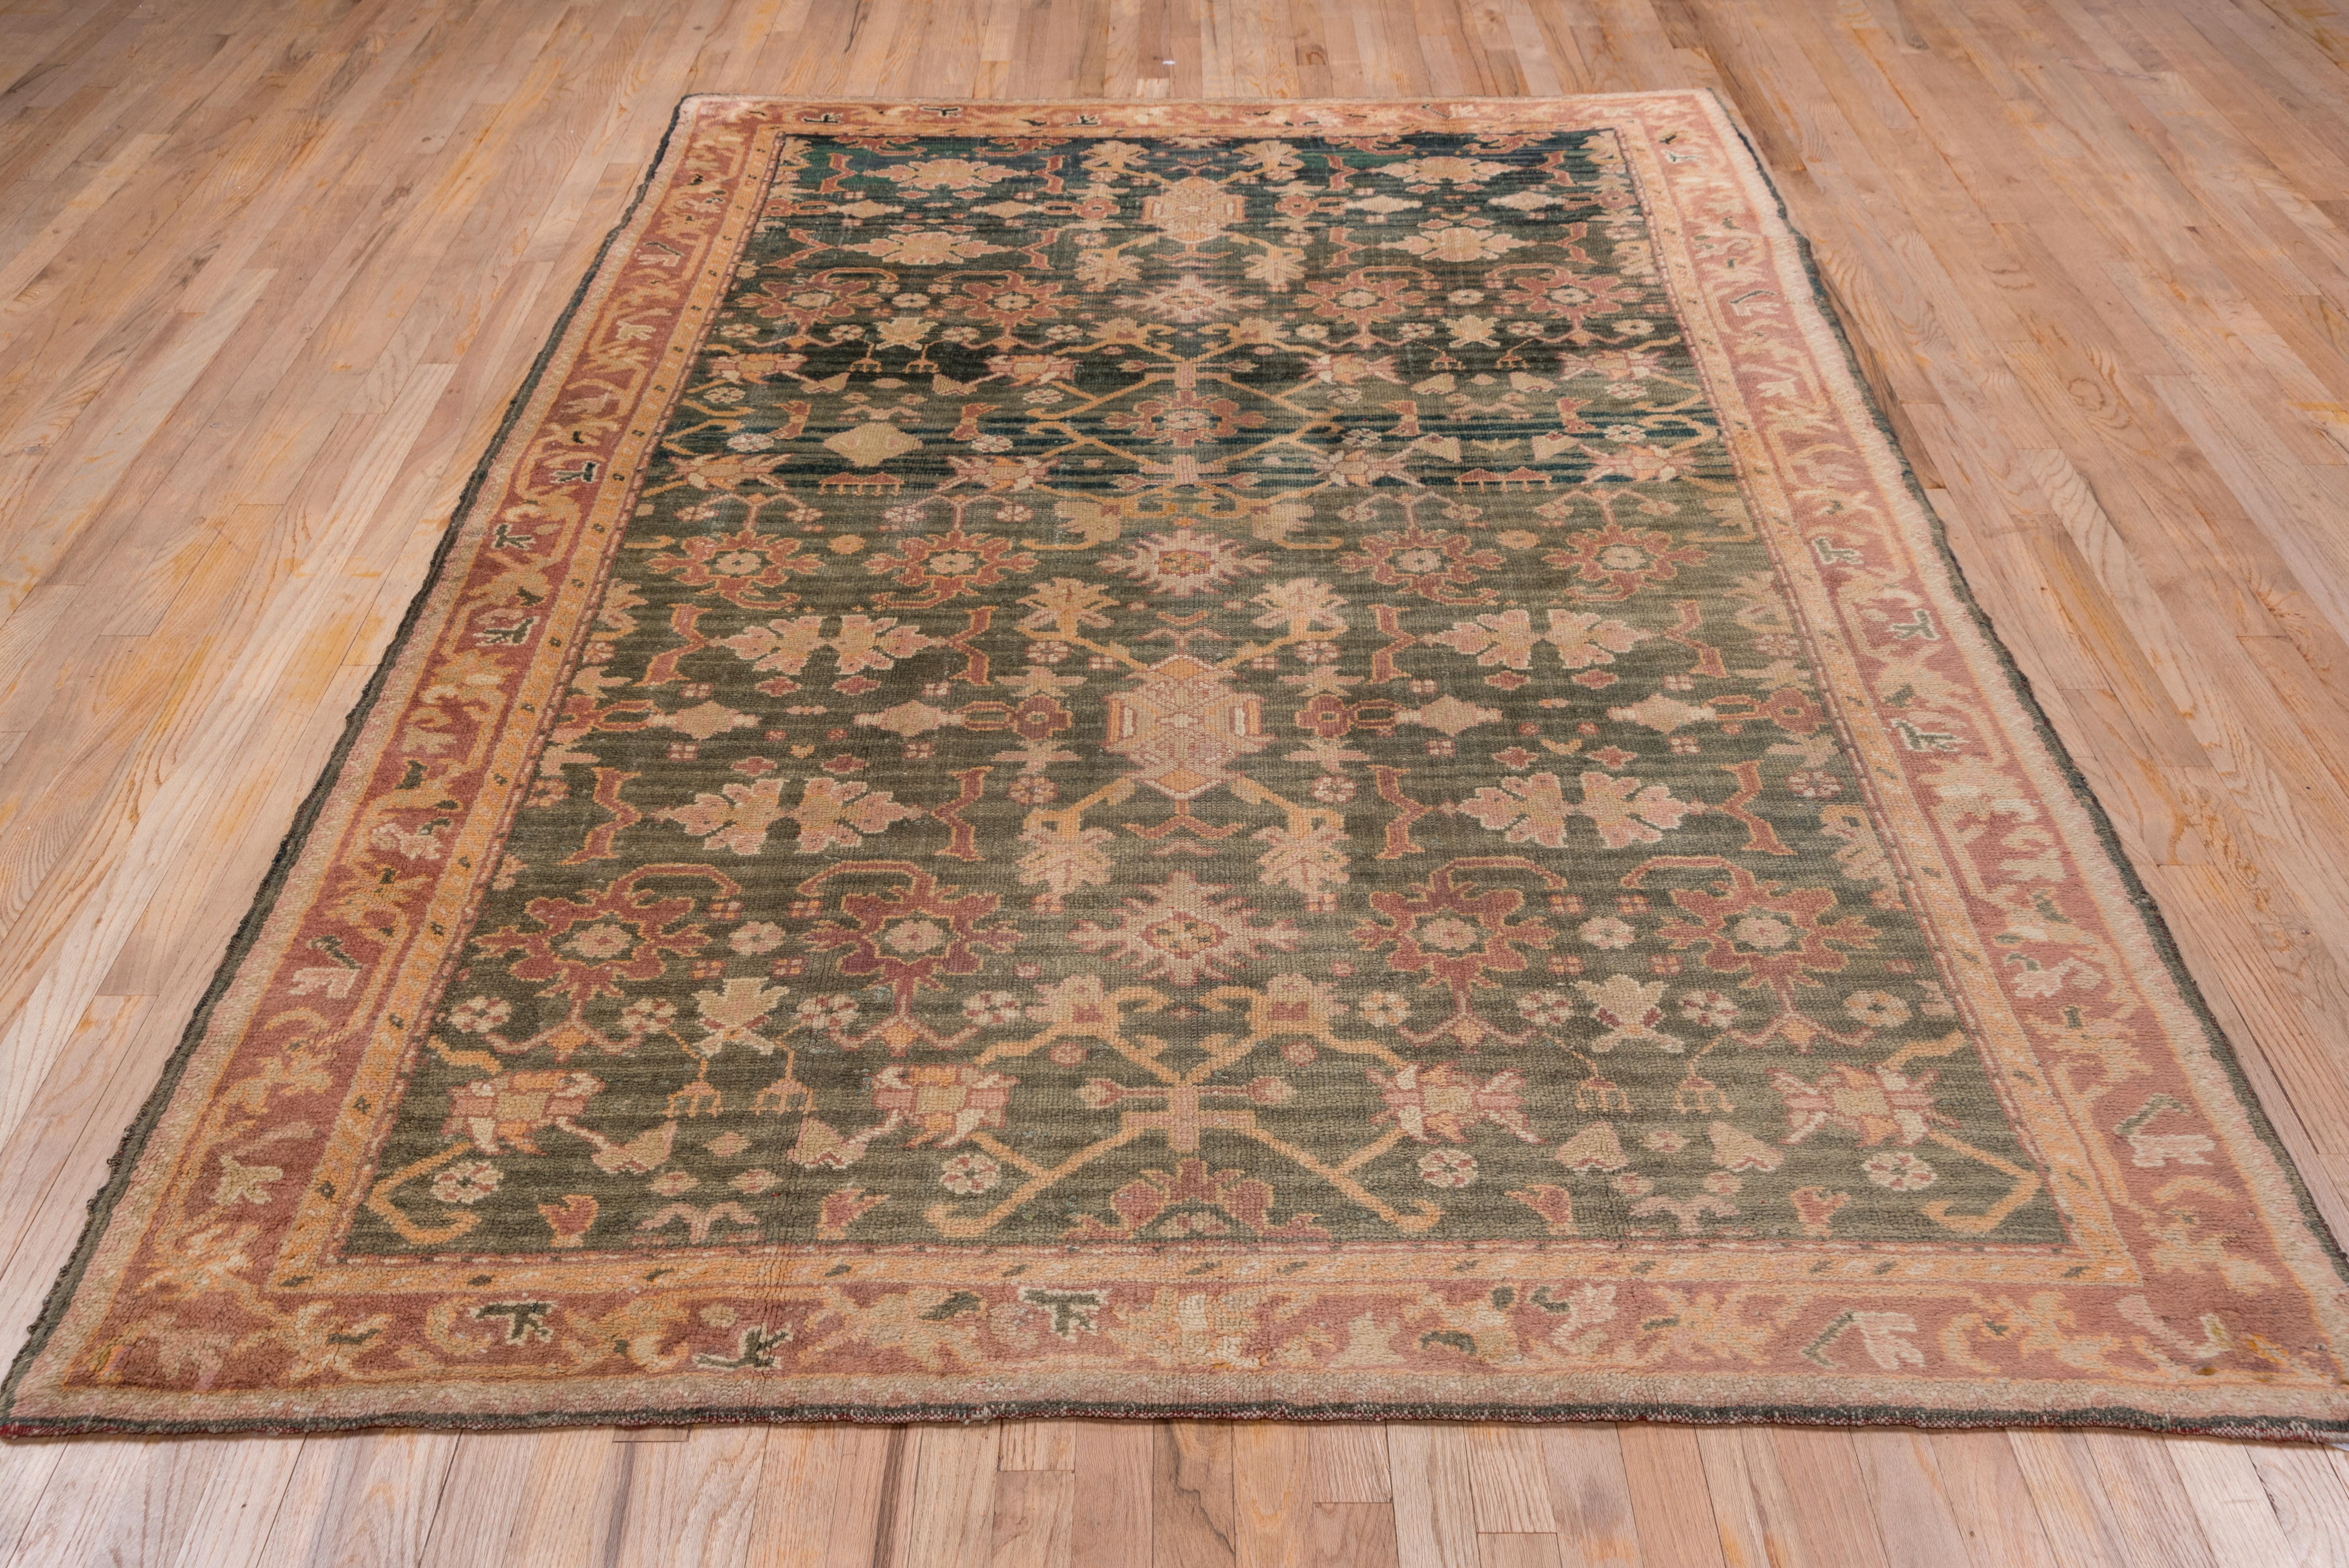 Hand-Knotted Antique Oushak Carpet, circa 1930s